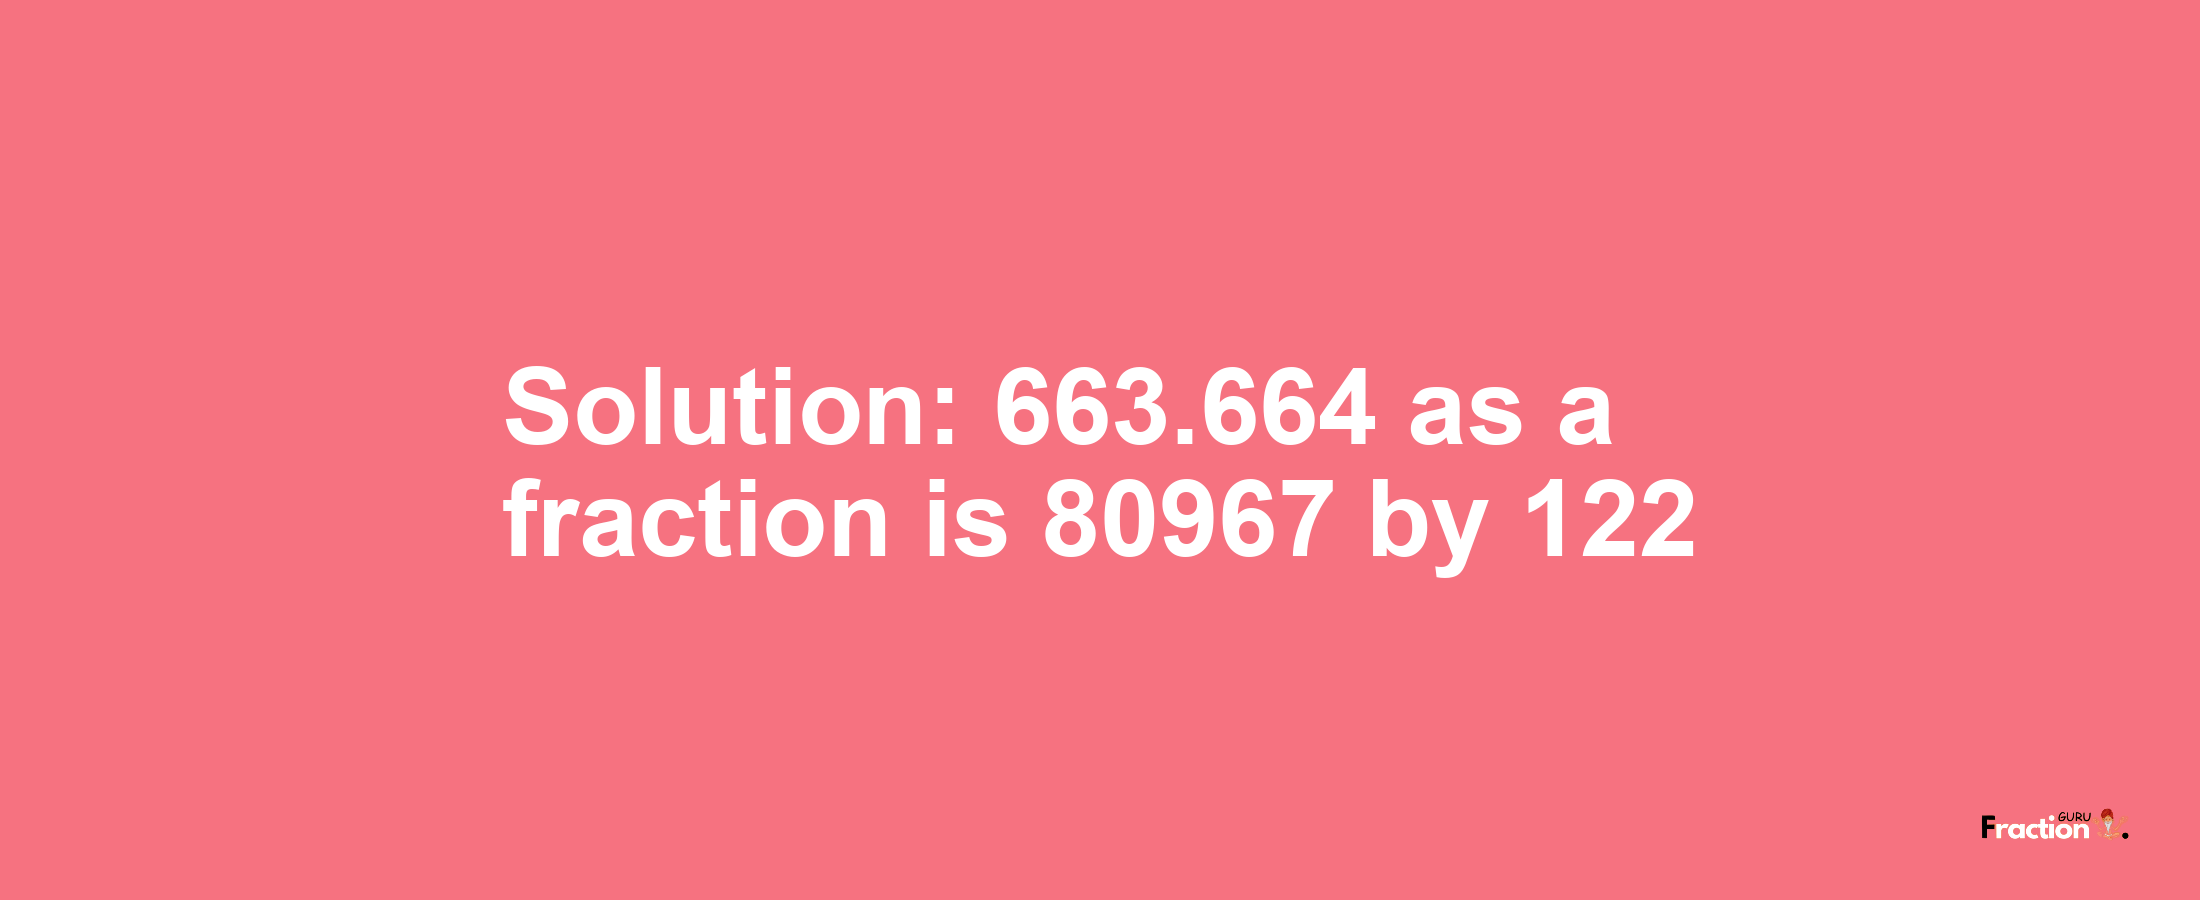 Solution:663.664 as a fraction is 80967/122